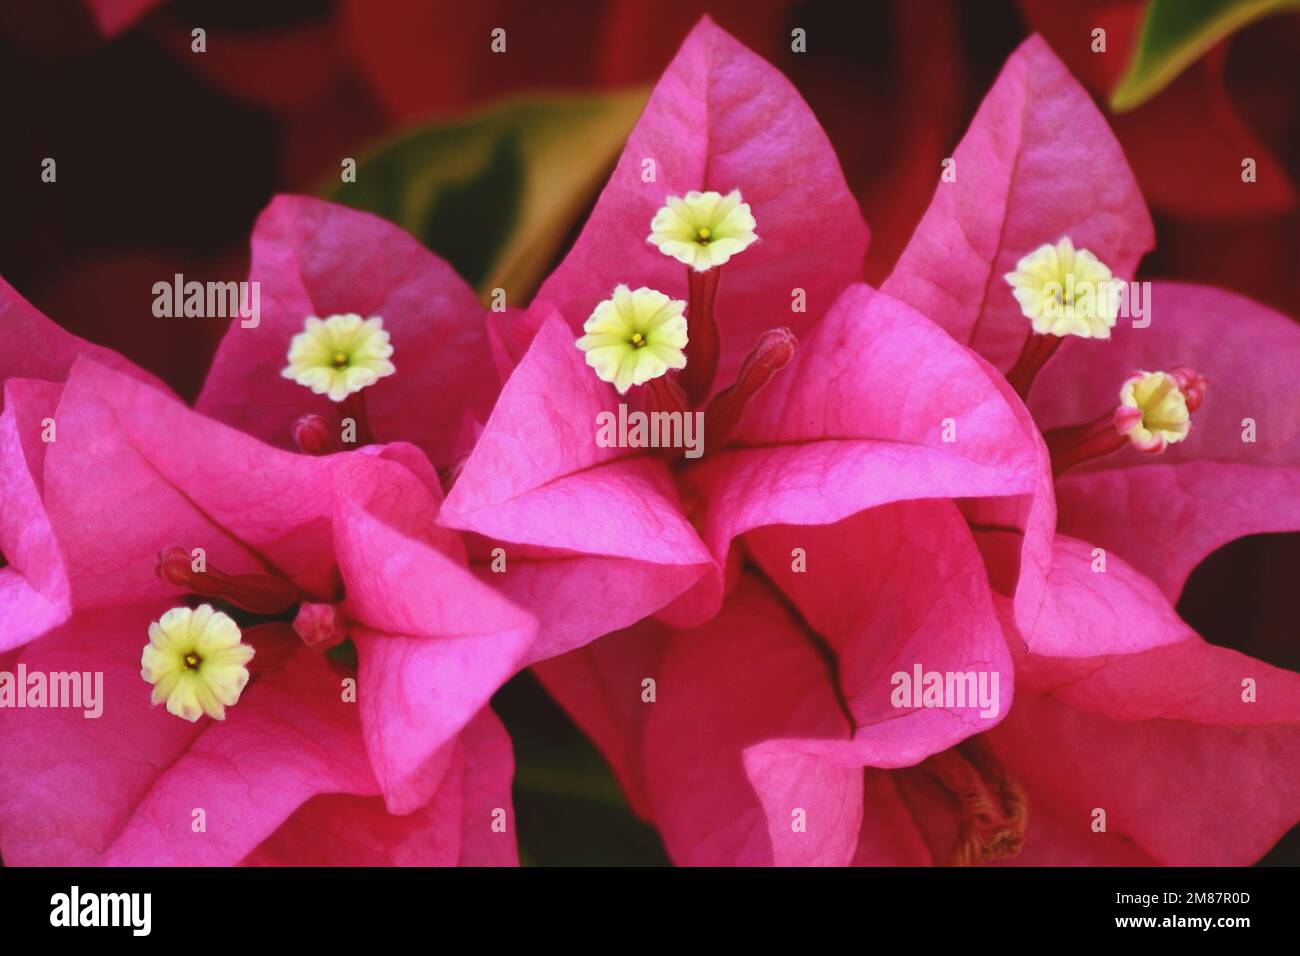 Bright pink flowers close up. Blossom pink flowers. Stock Photo